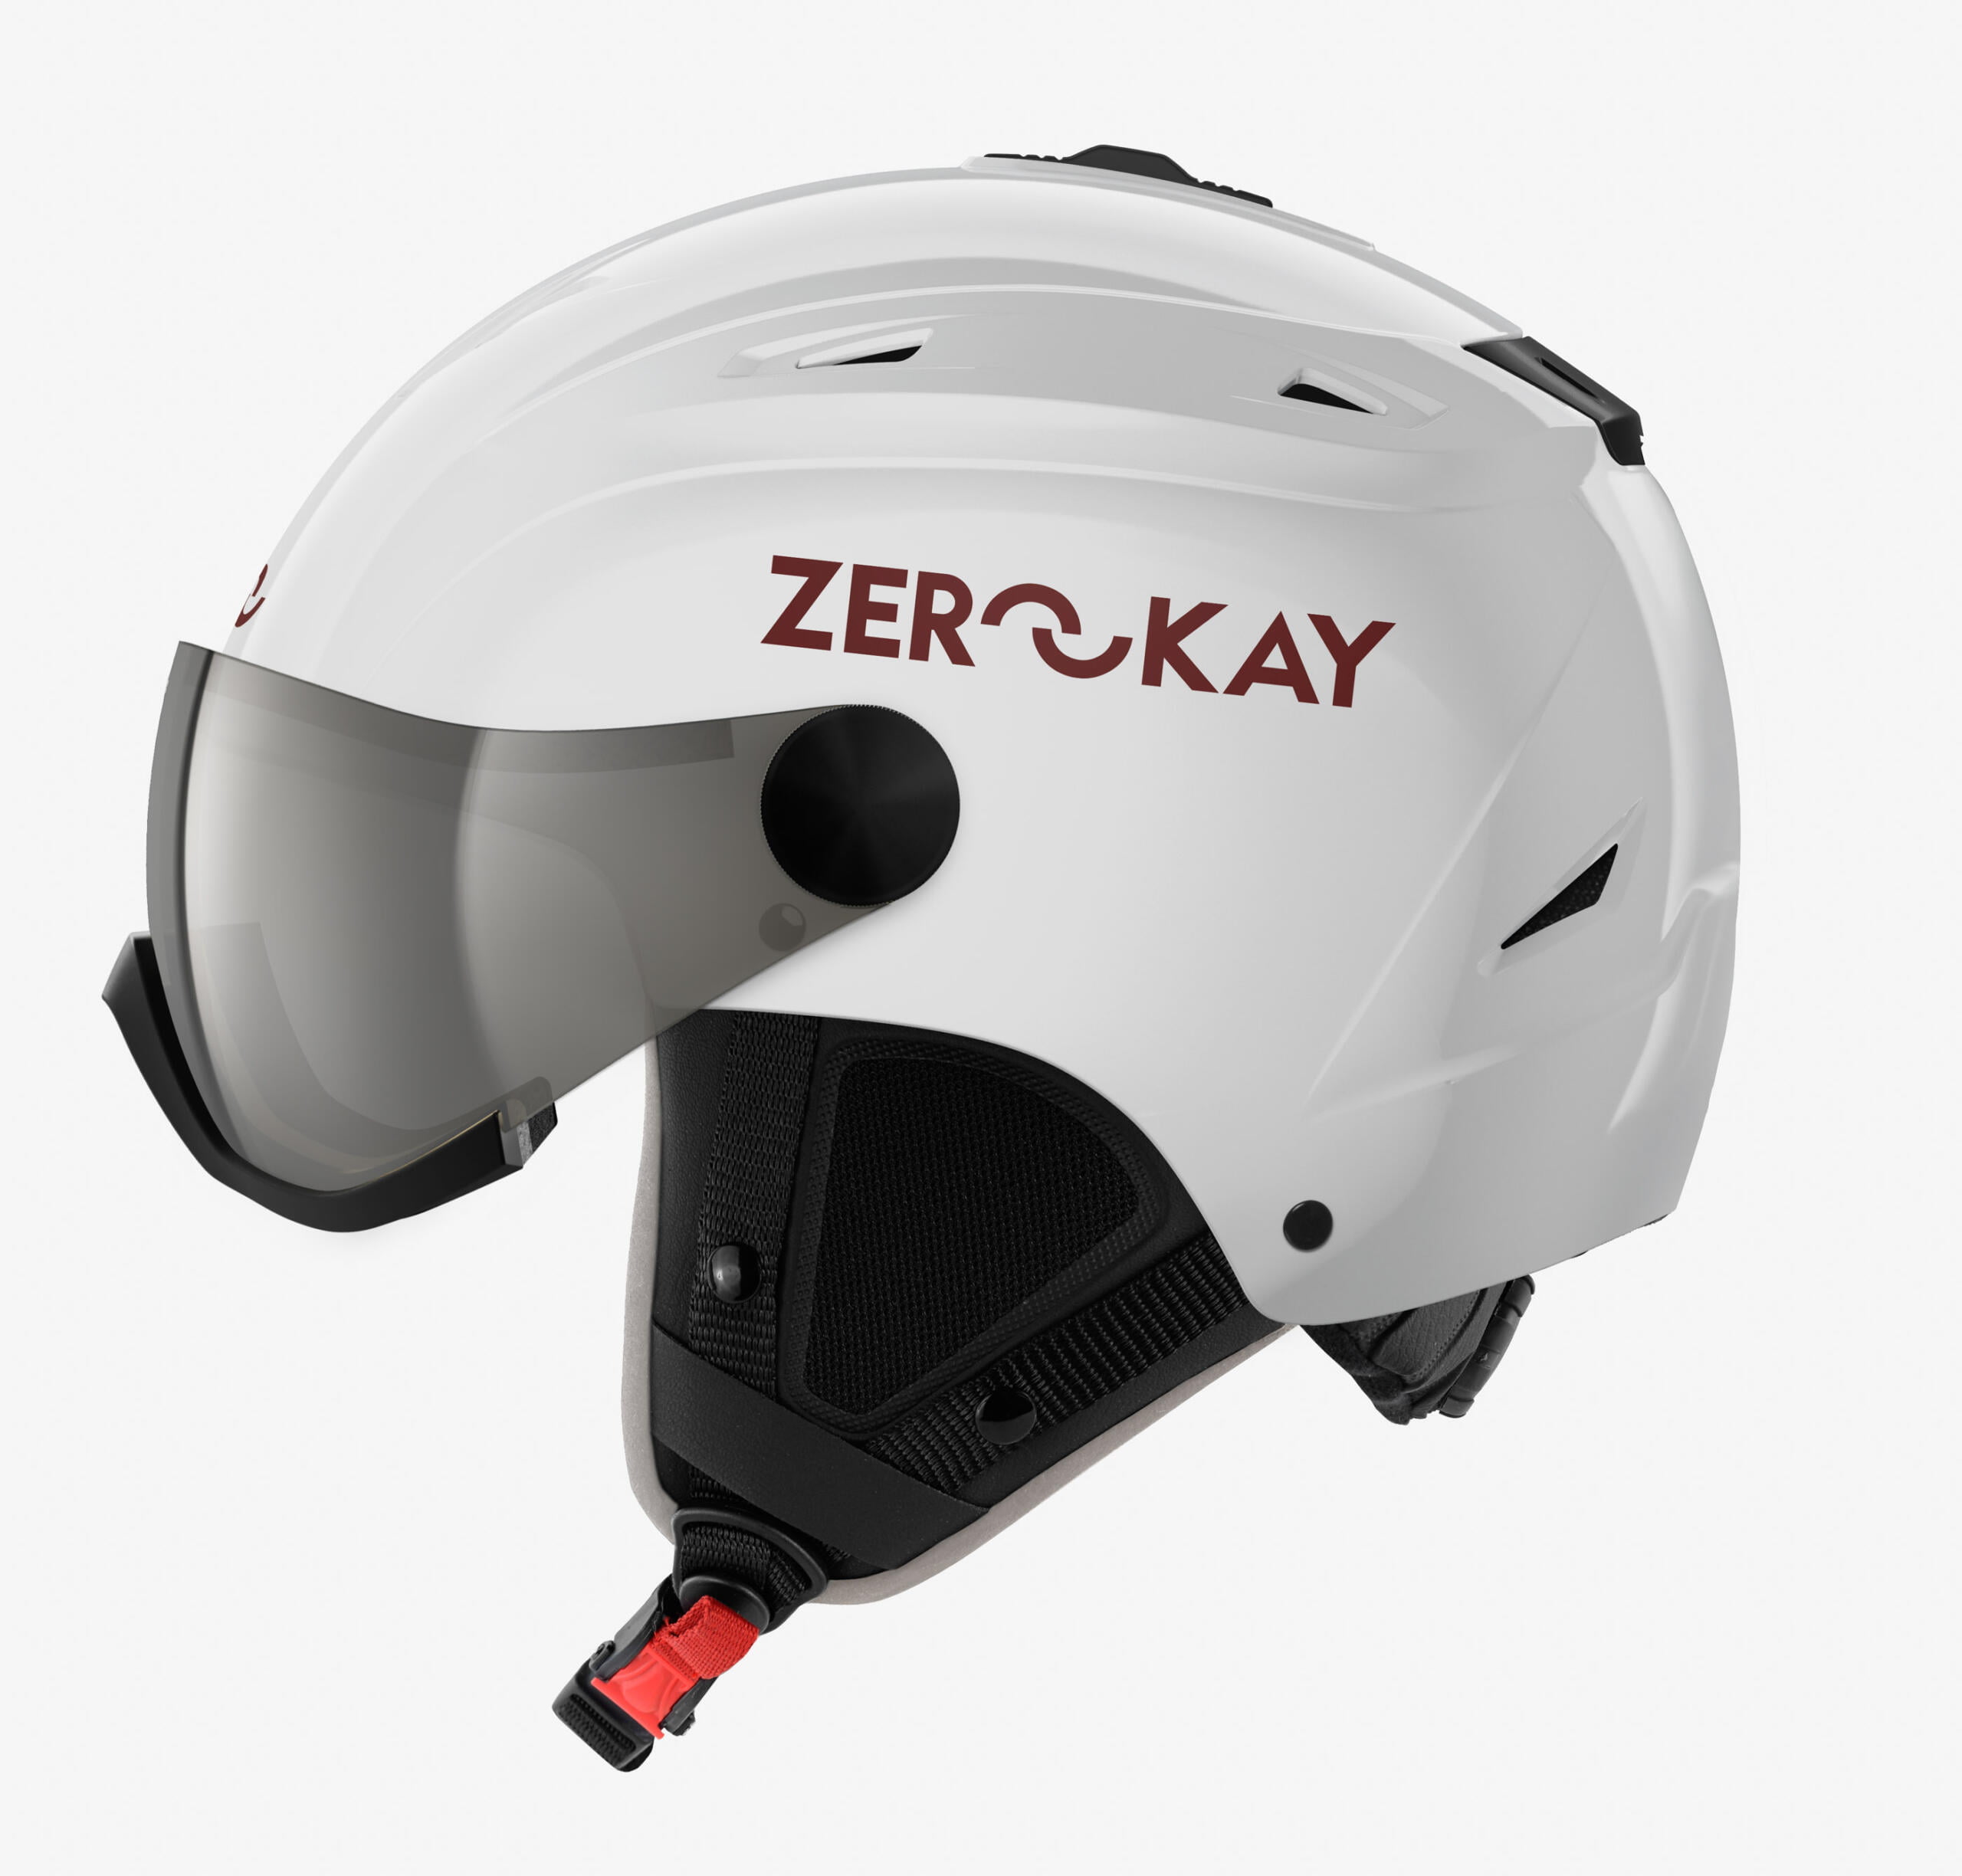 Zerokay luxury ski helmet with integrated visor in white with grey sanitised lining, featuring a gloss finish and offering superior comfort and certified safety features.